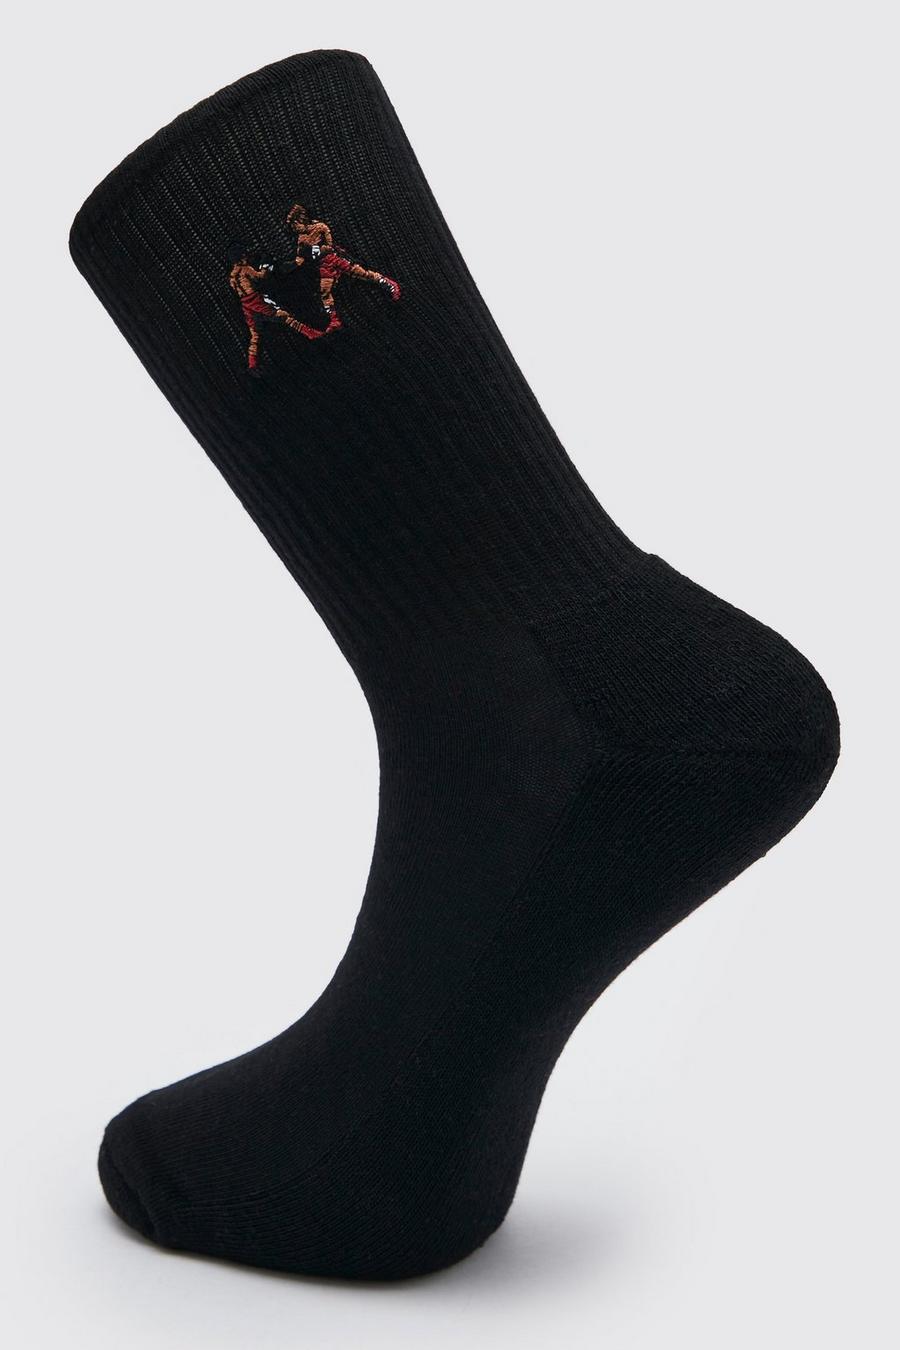 Black 1 Pack Embroidered Boxing Sock